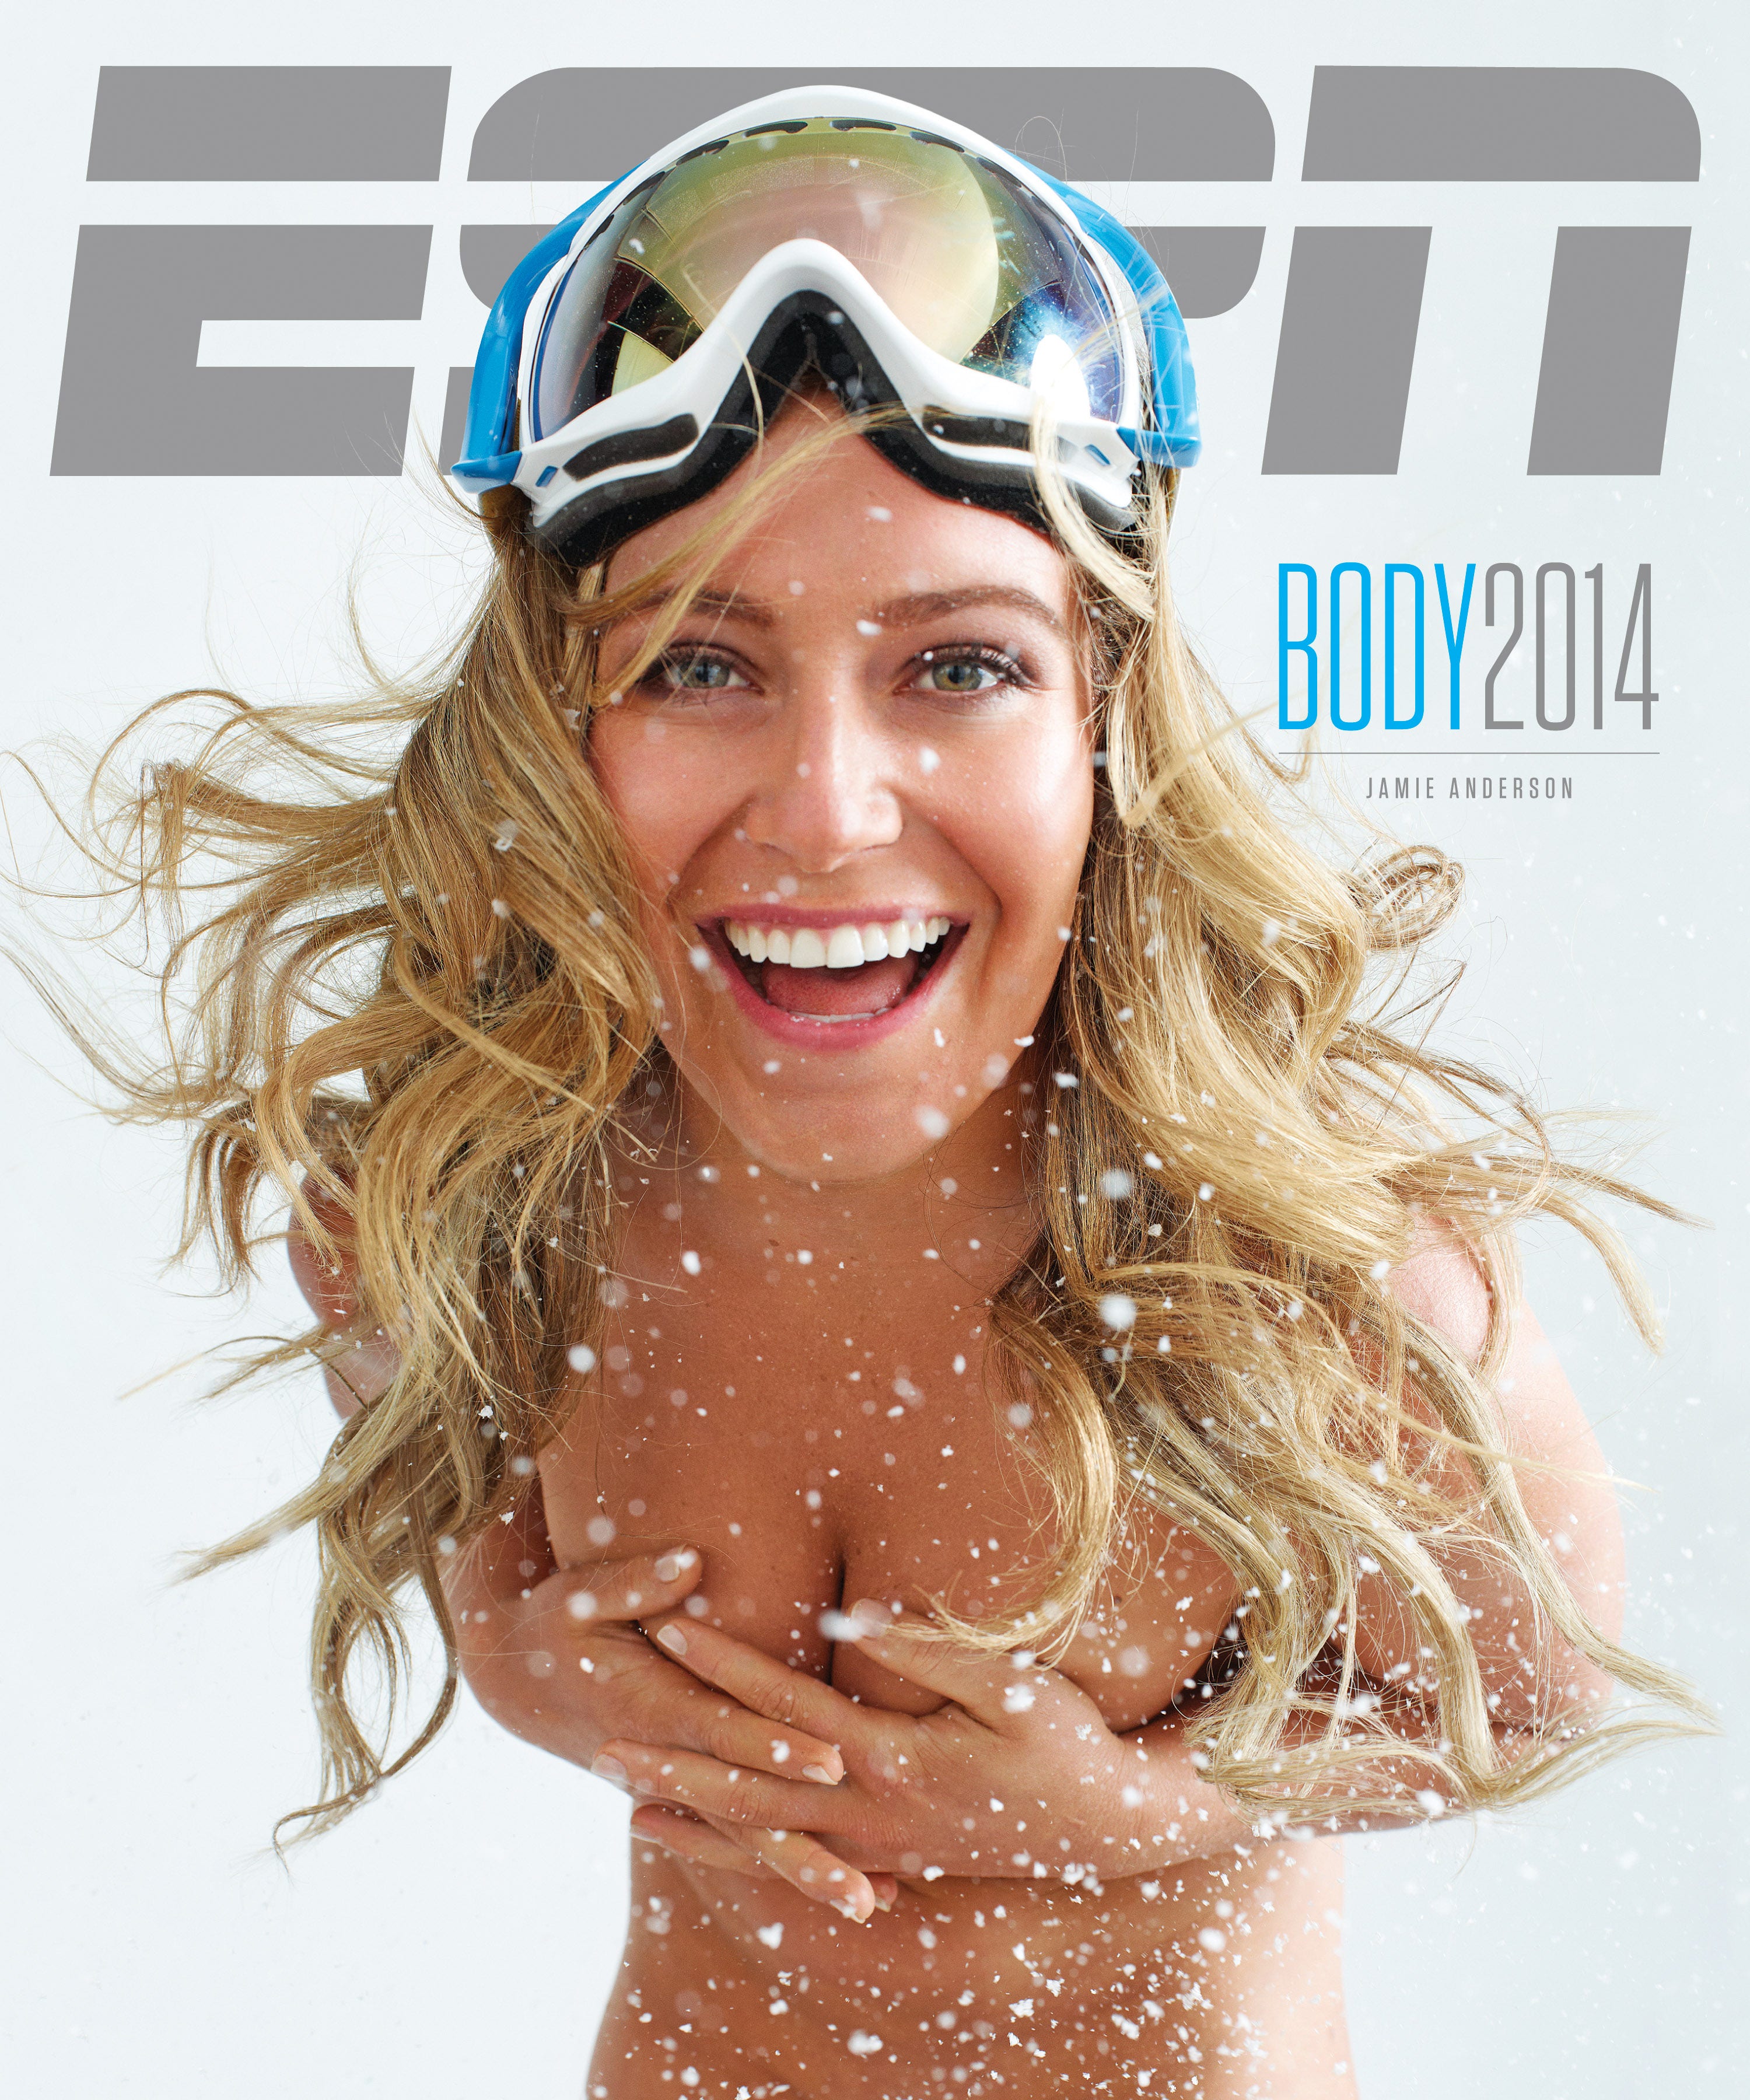 Jamie Anderson covers naked athlete issue of ESPN The Magazine.